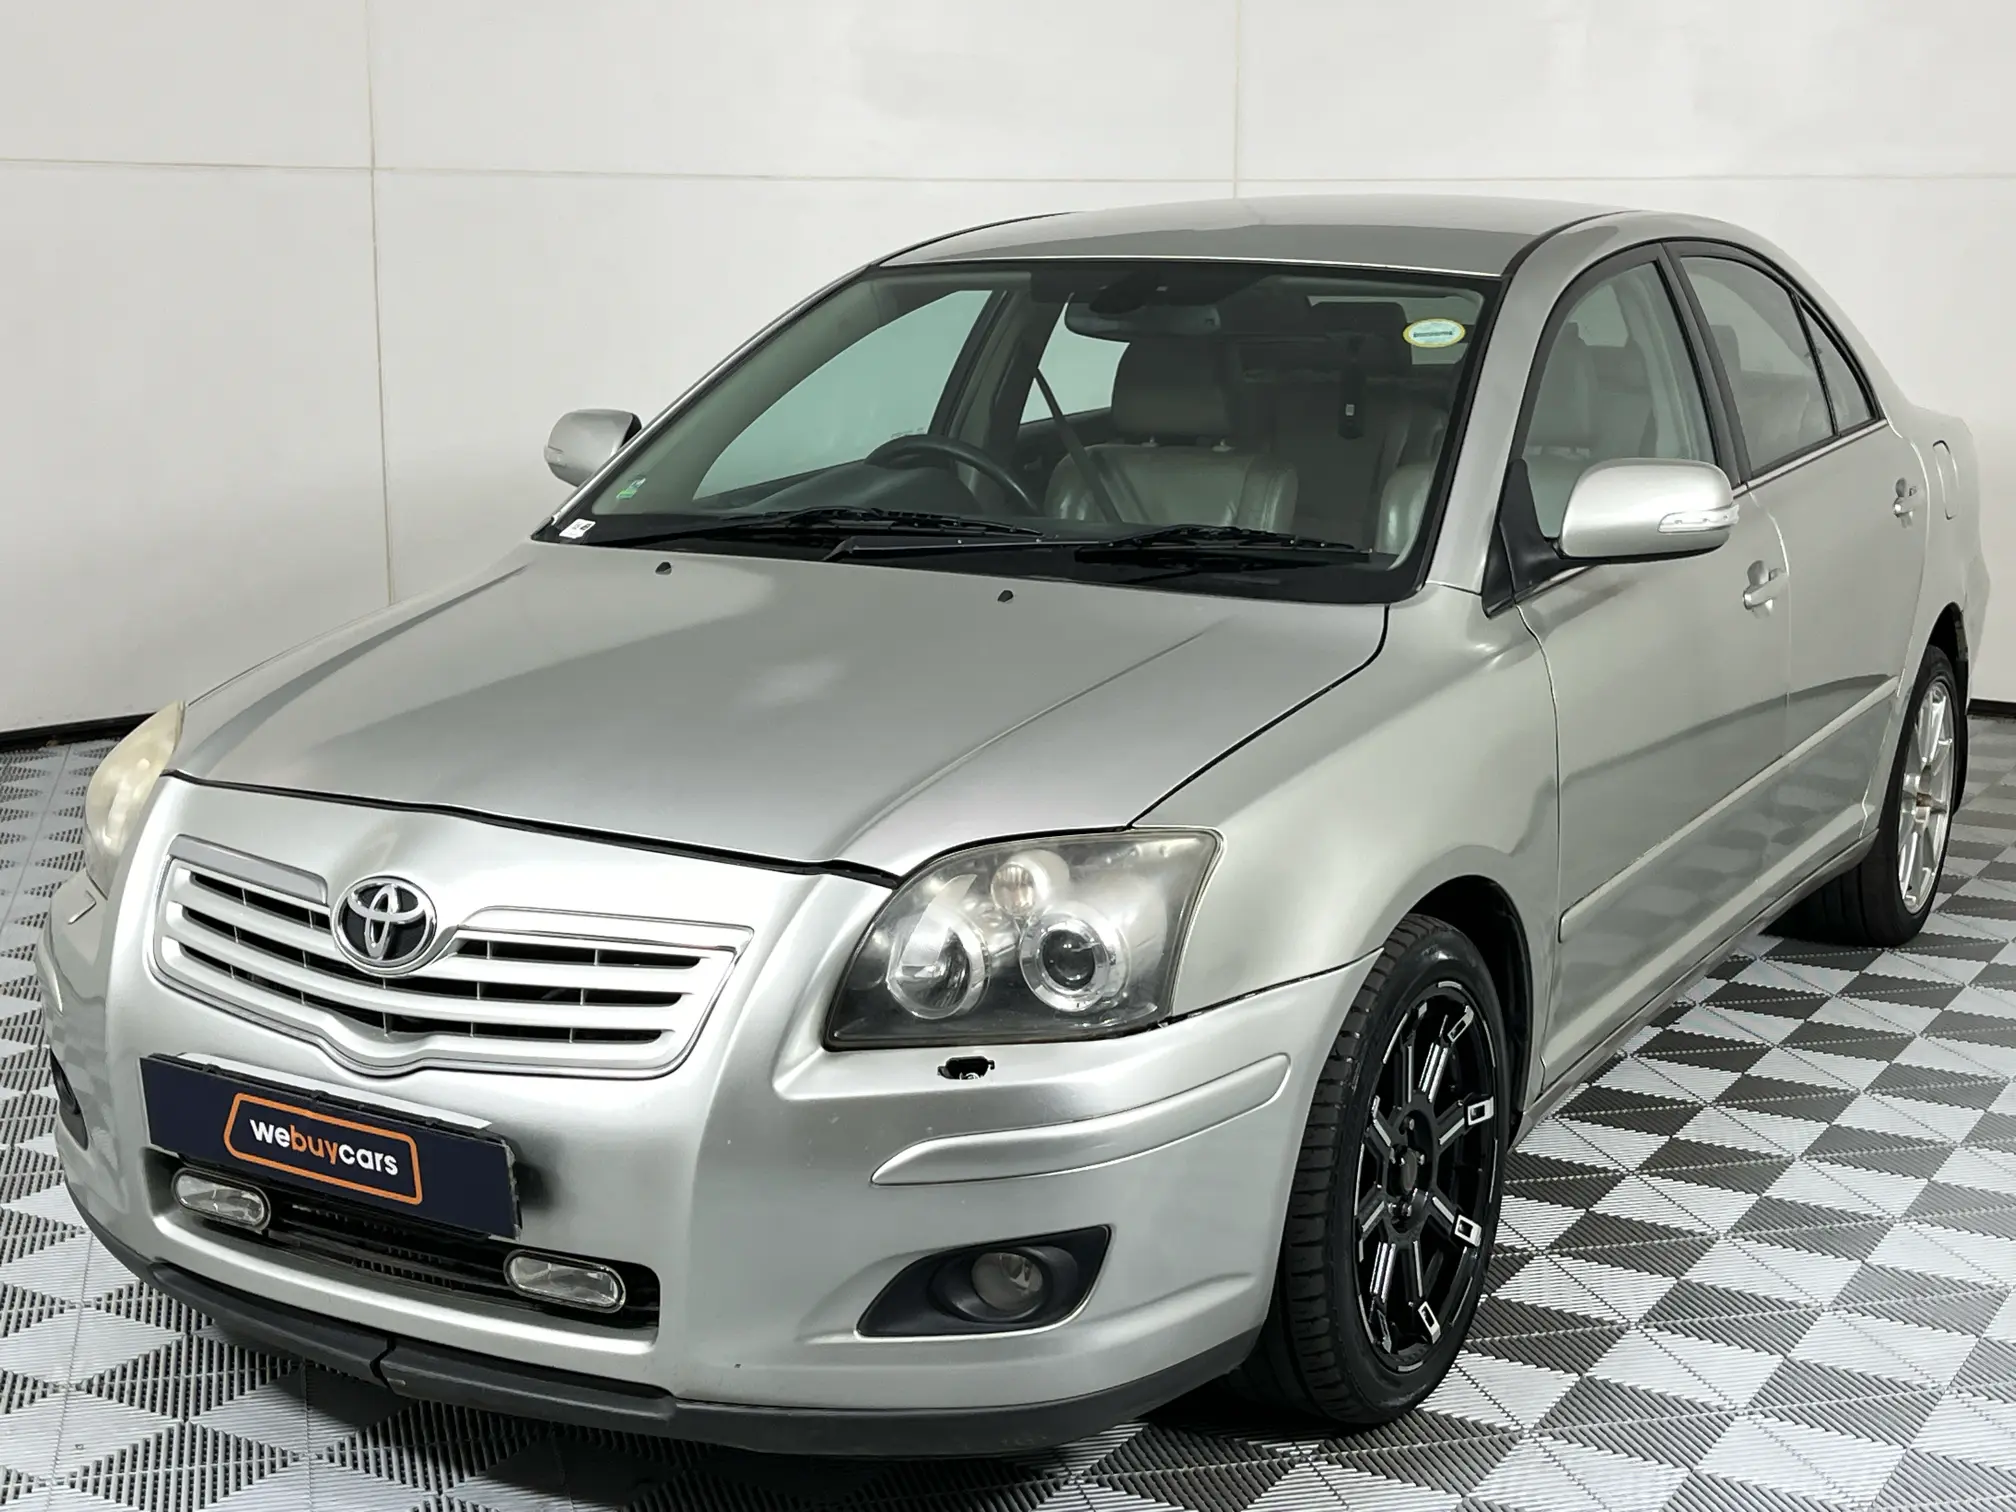 2006 Toyota Avensis 2.2 D-4d Exclusive